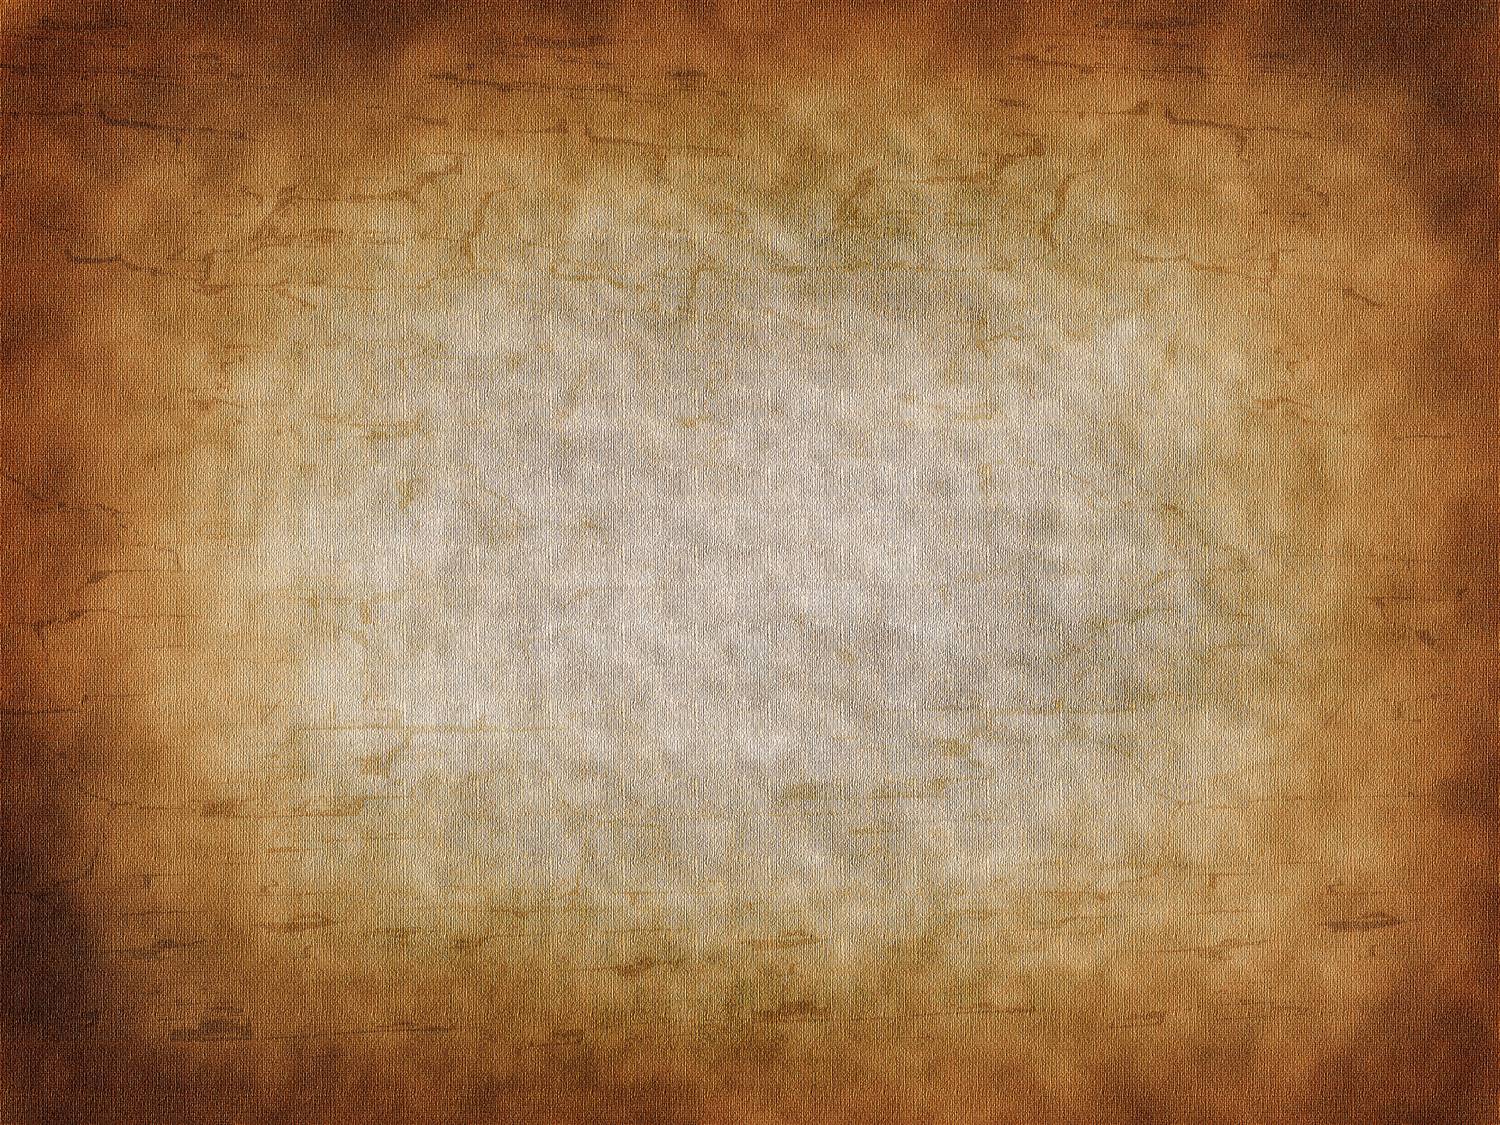 Pirate Map Background Image & Picture